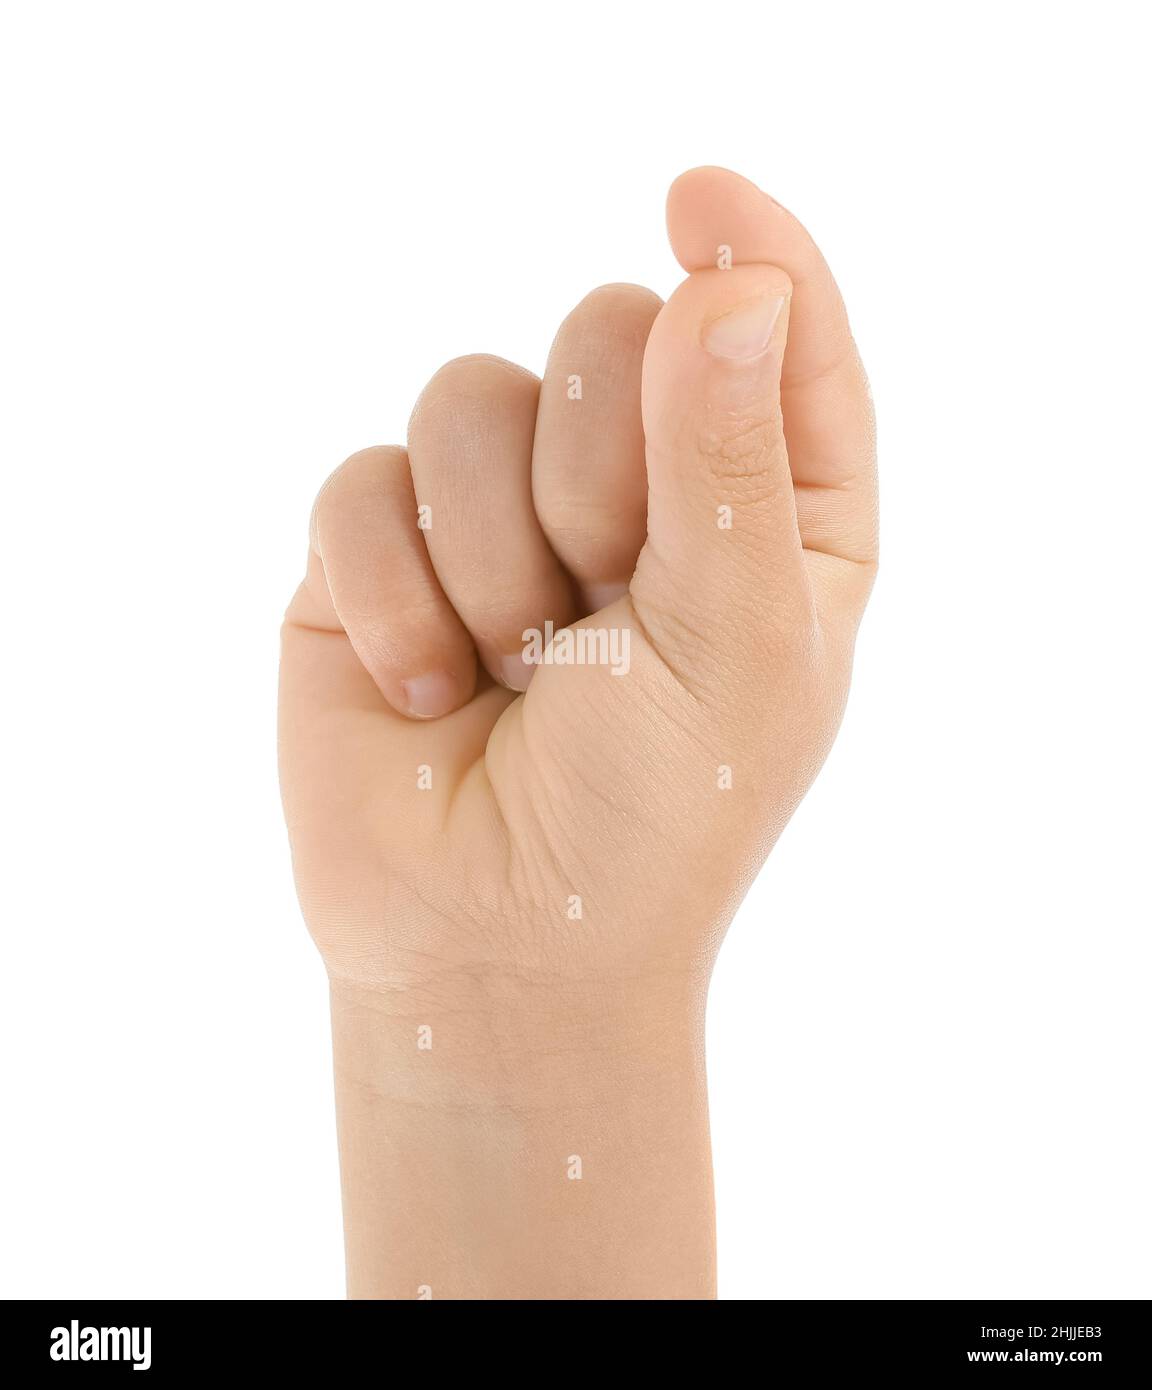 Child snapping fingers on white background Stock Photo